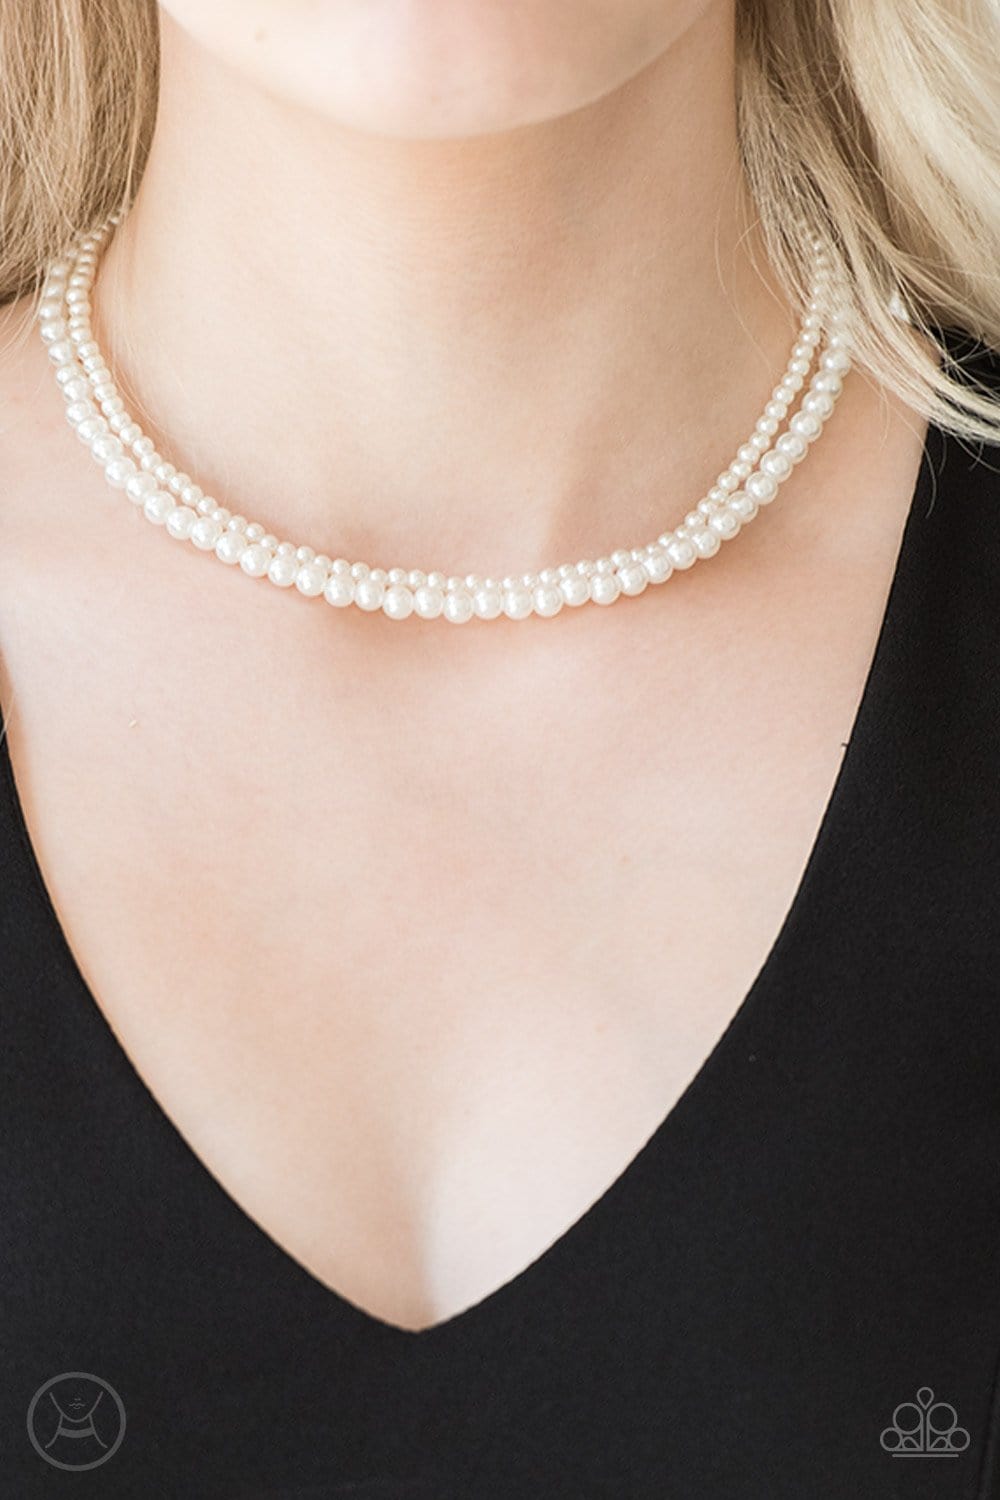 Ladies Choice - White Choker - Jewels N’ Thingz Boutique